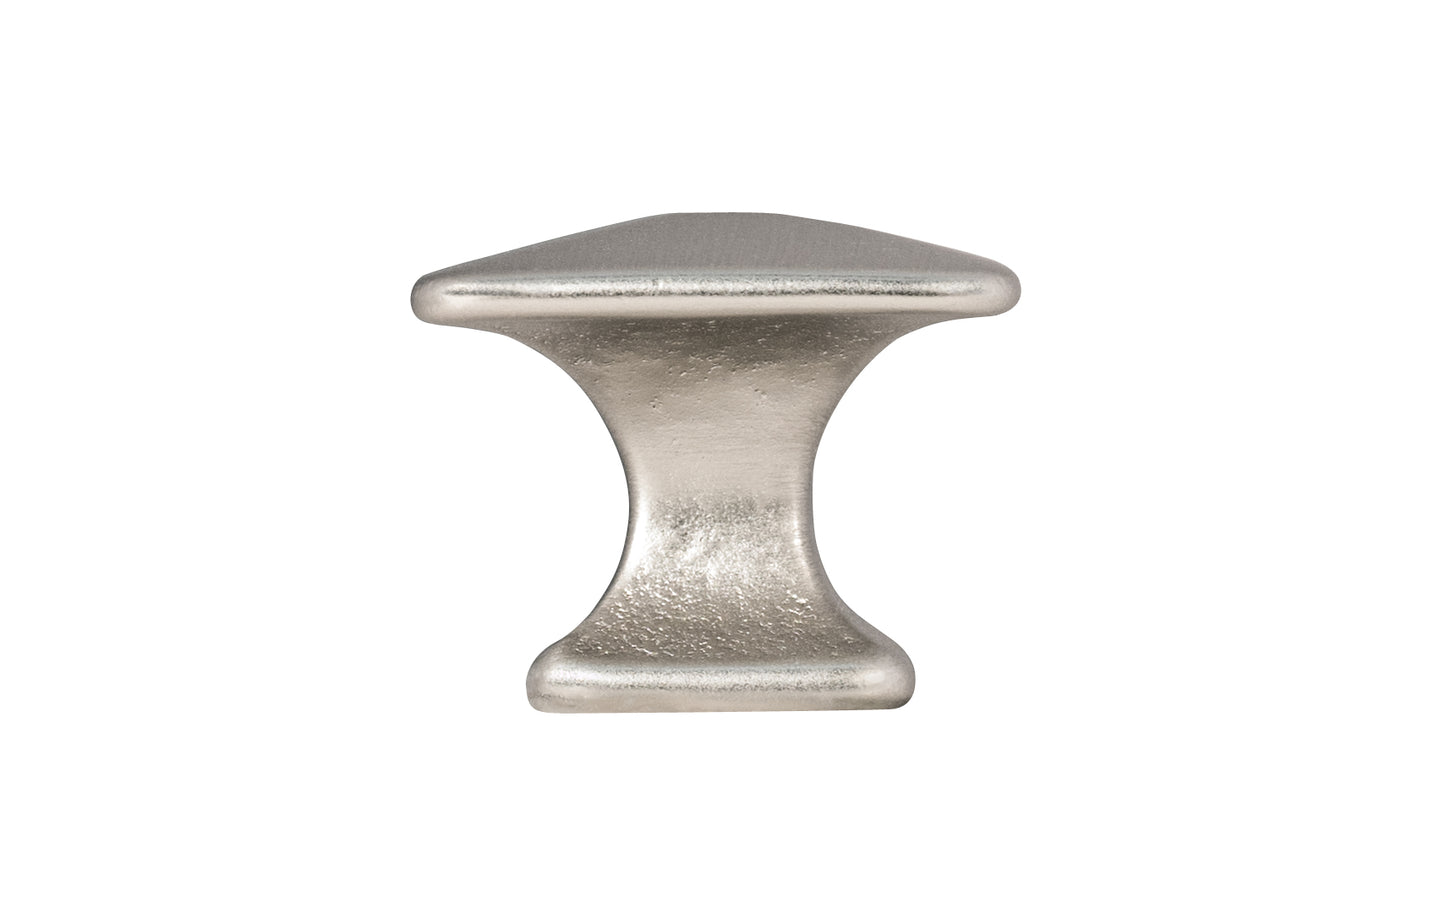 Vintage-style Hardware · Solid Brass Pyramid Shape Square Cabinet Knob ~ 1" size knob. Made of solid brass, this stylish knob has a smooth & weighty feel. Mission-style, Arts & Crafts style of hardware. Brushed Nickel  Finish